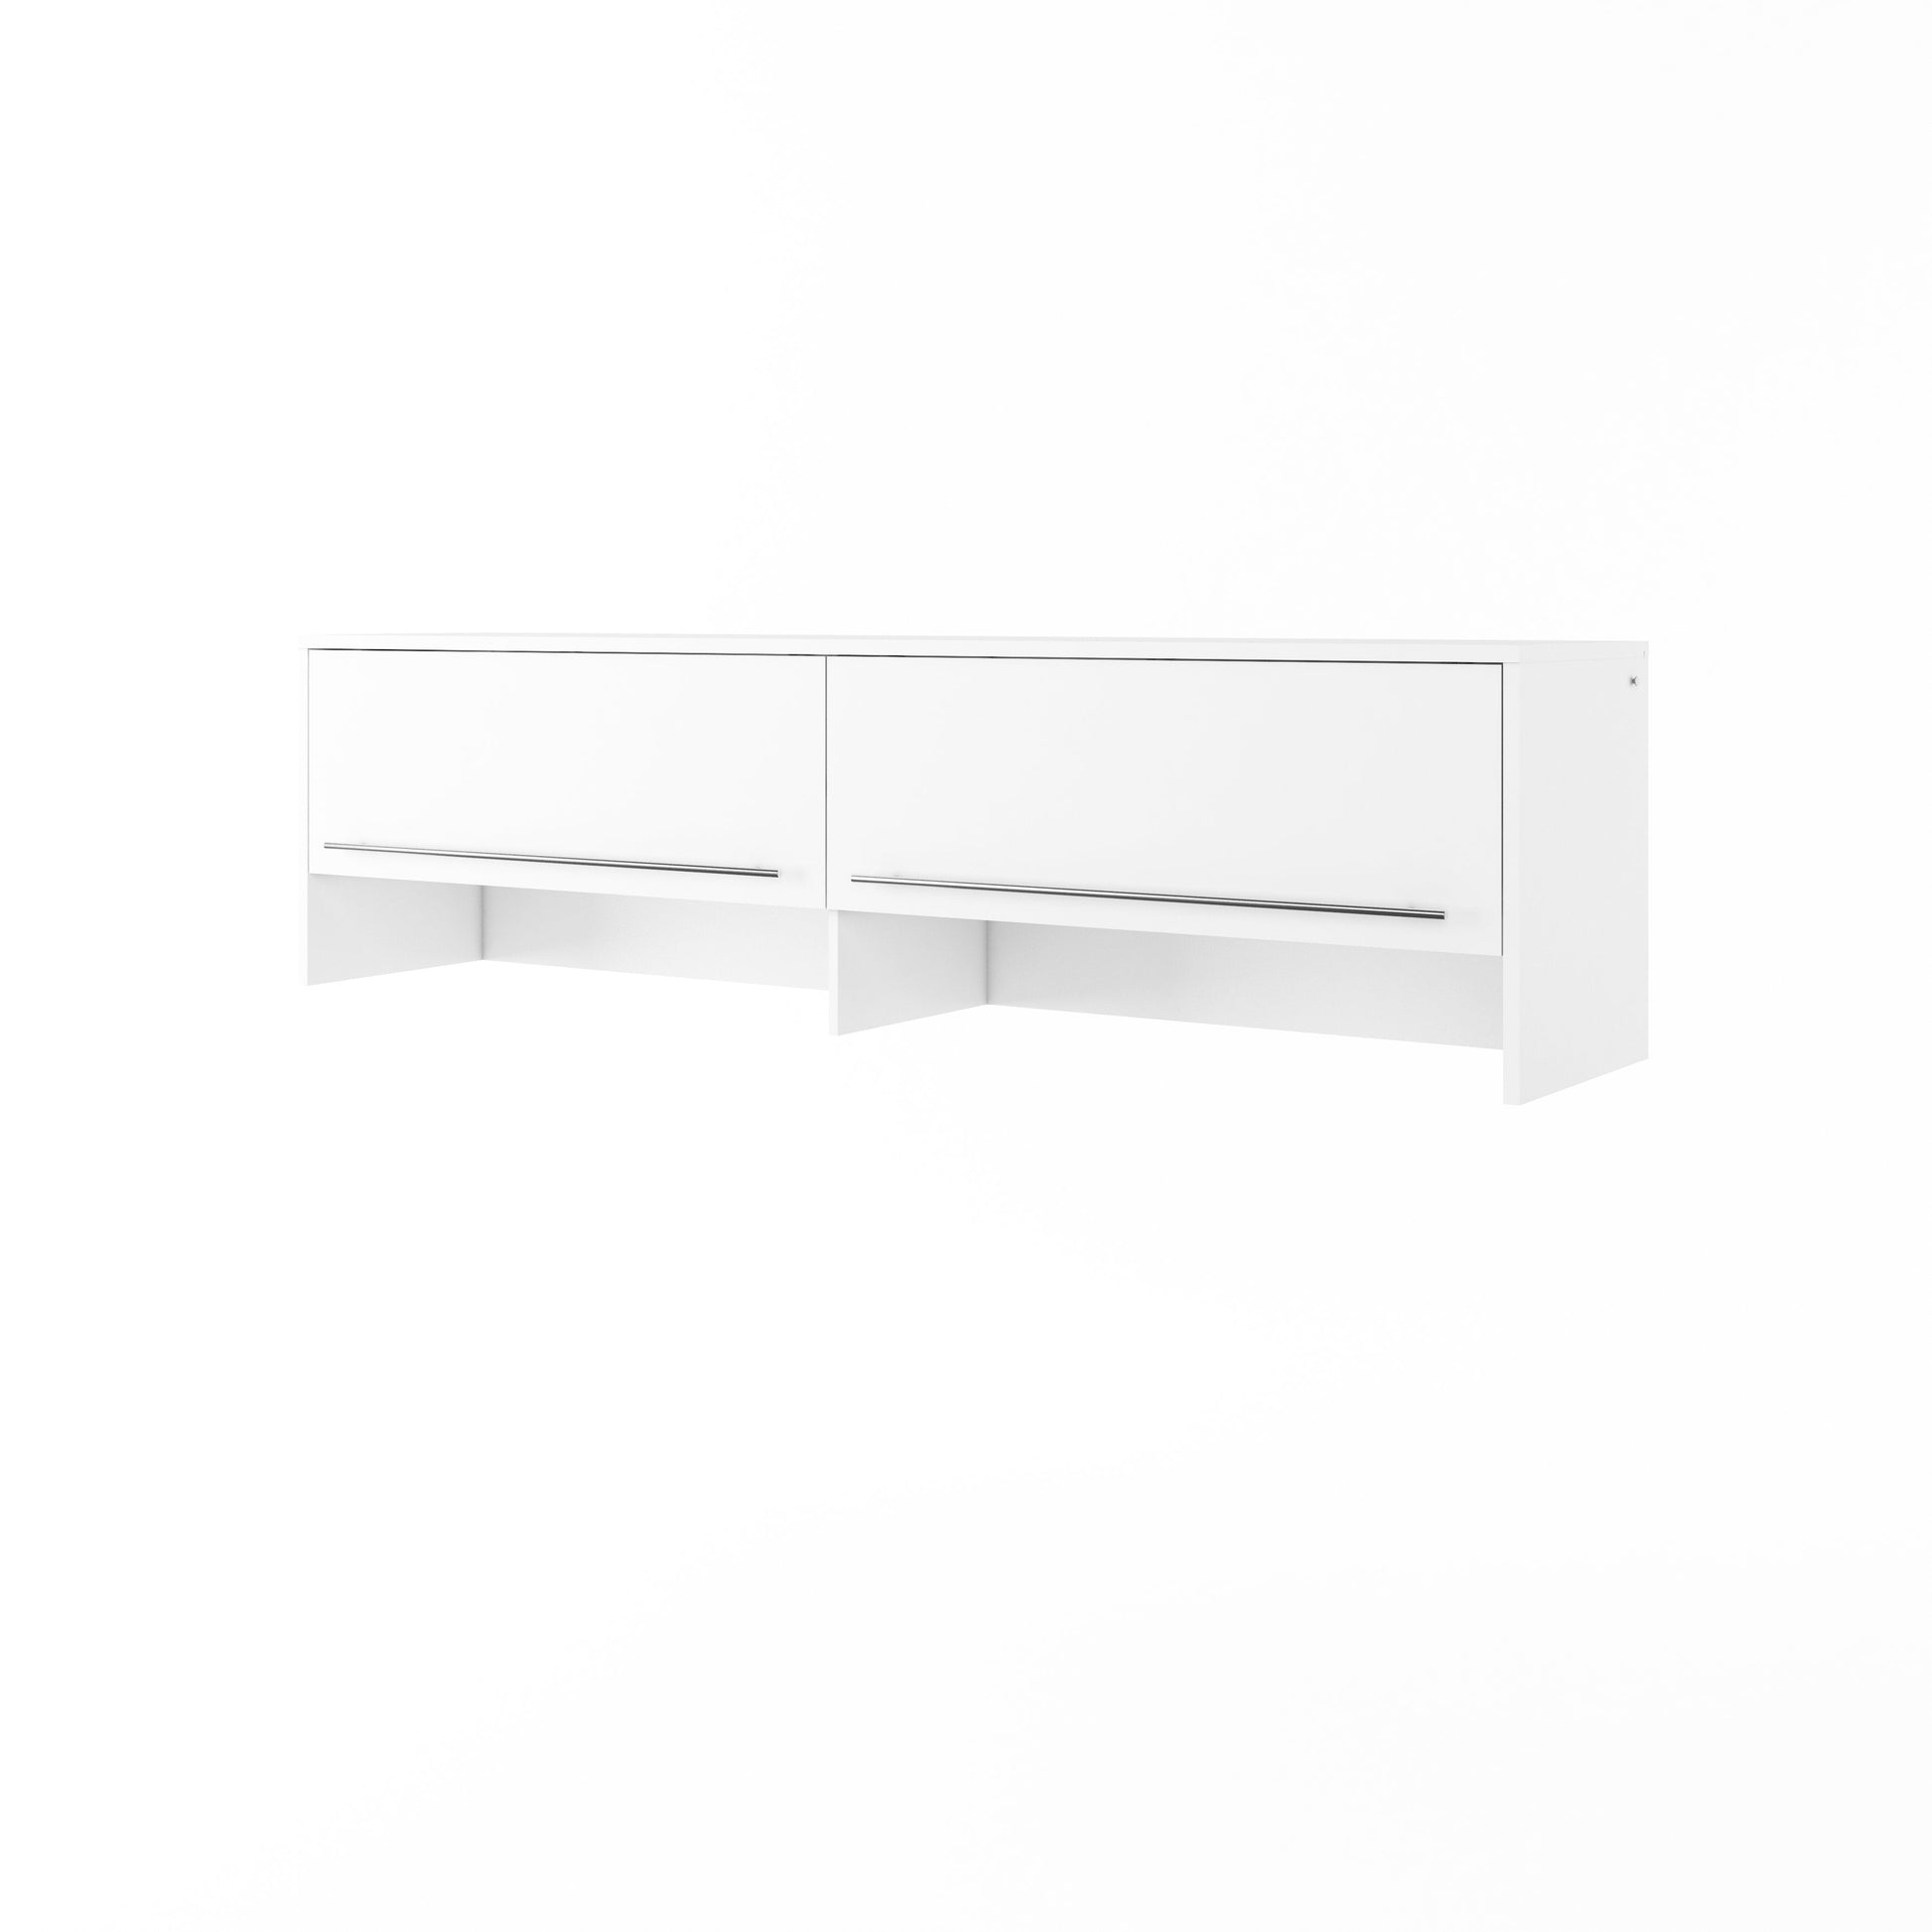 CP-09 Over Bed Unit for Horizontal Wall Bed Concept 140cm White Matt Wall Bed with Storage Unit 